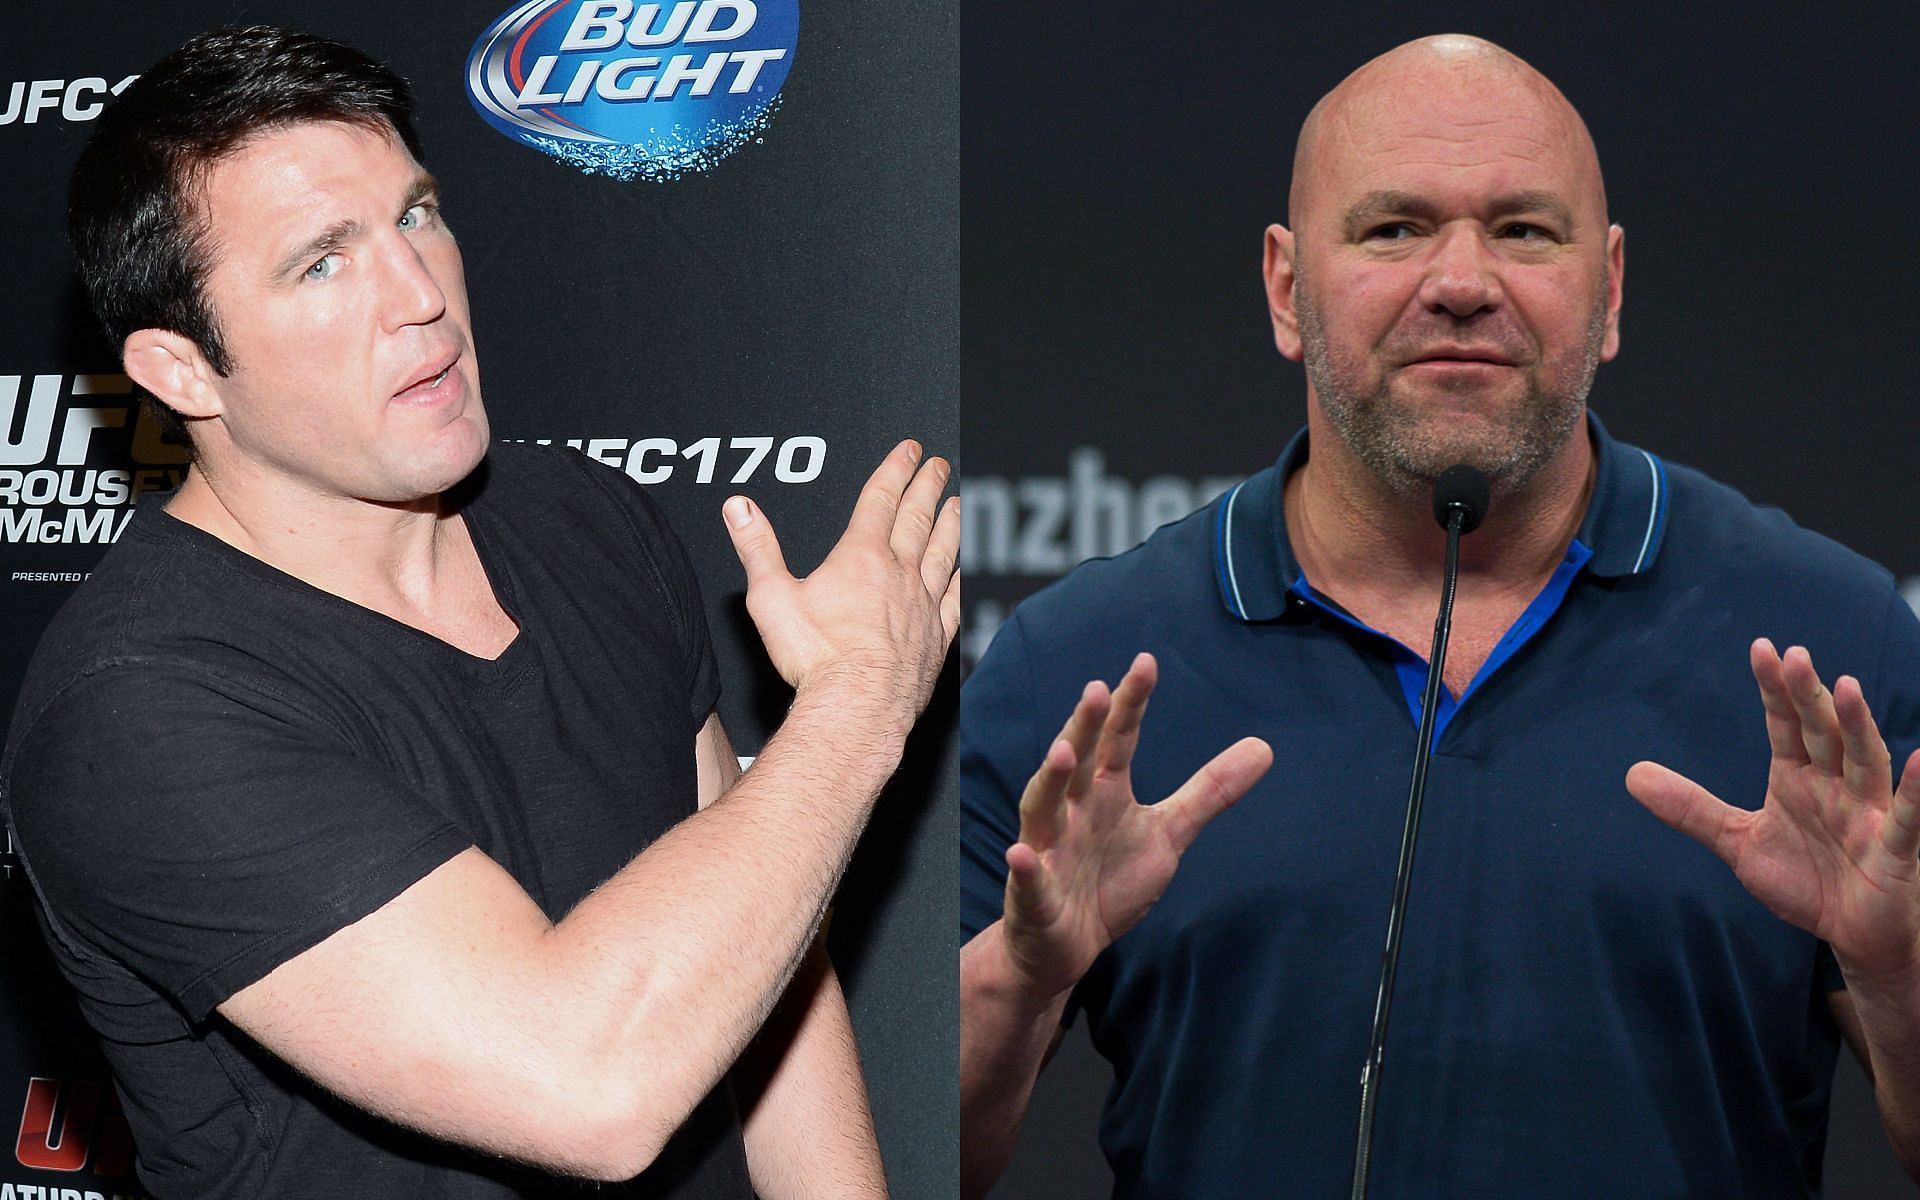 Chael Sonnen (left) and Dana White (right) (Images via Getty)